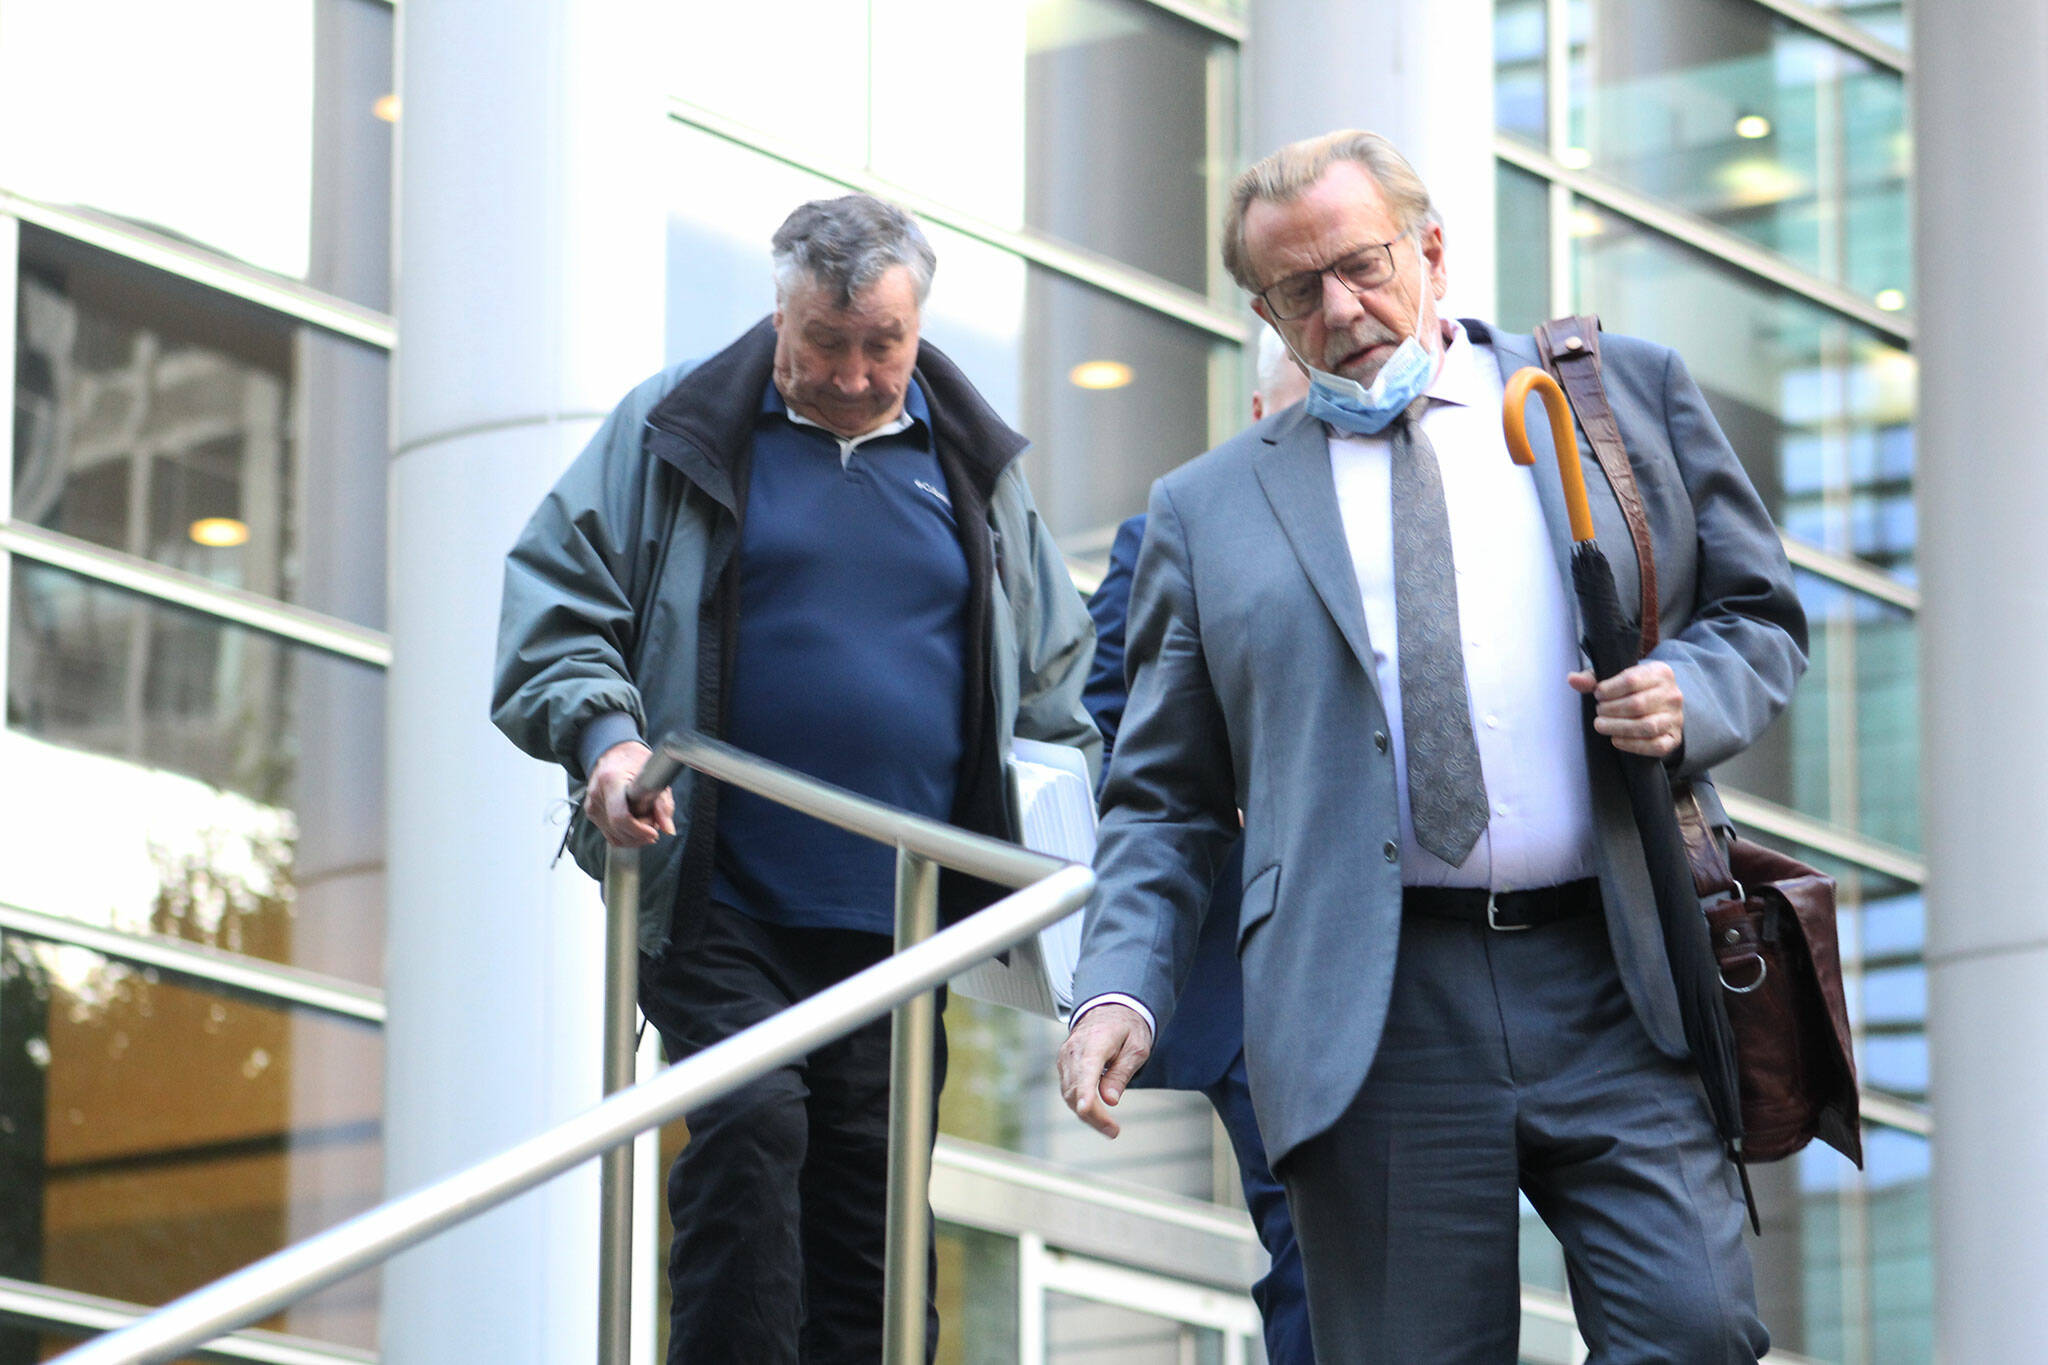 Photo by Ray Miller-Still 
Allan Thomas and his attorney John Henry Browne exit the U.S. District Court building in Seattle following his conviction on several of the counts he was charged with in the drainage district trial.